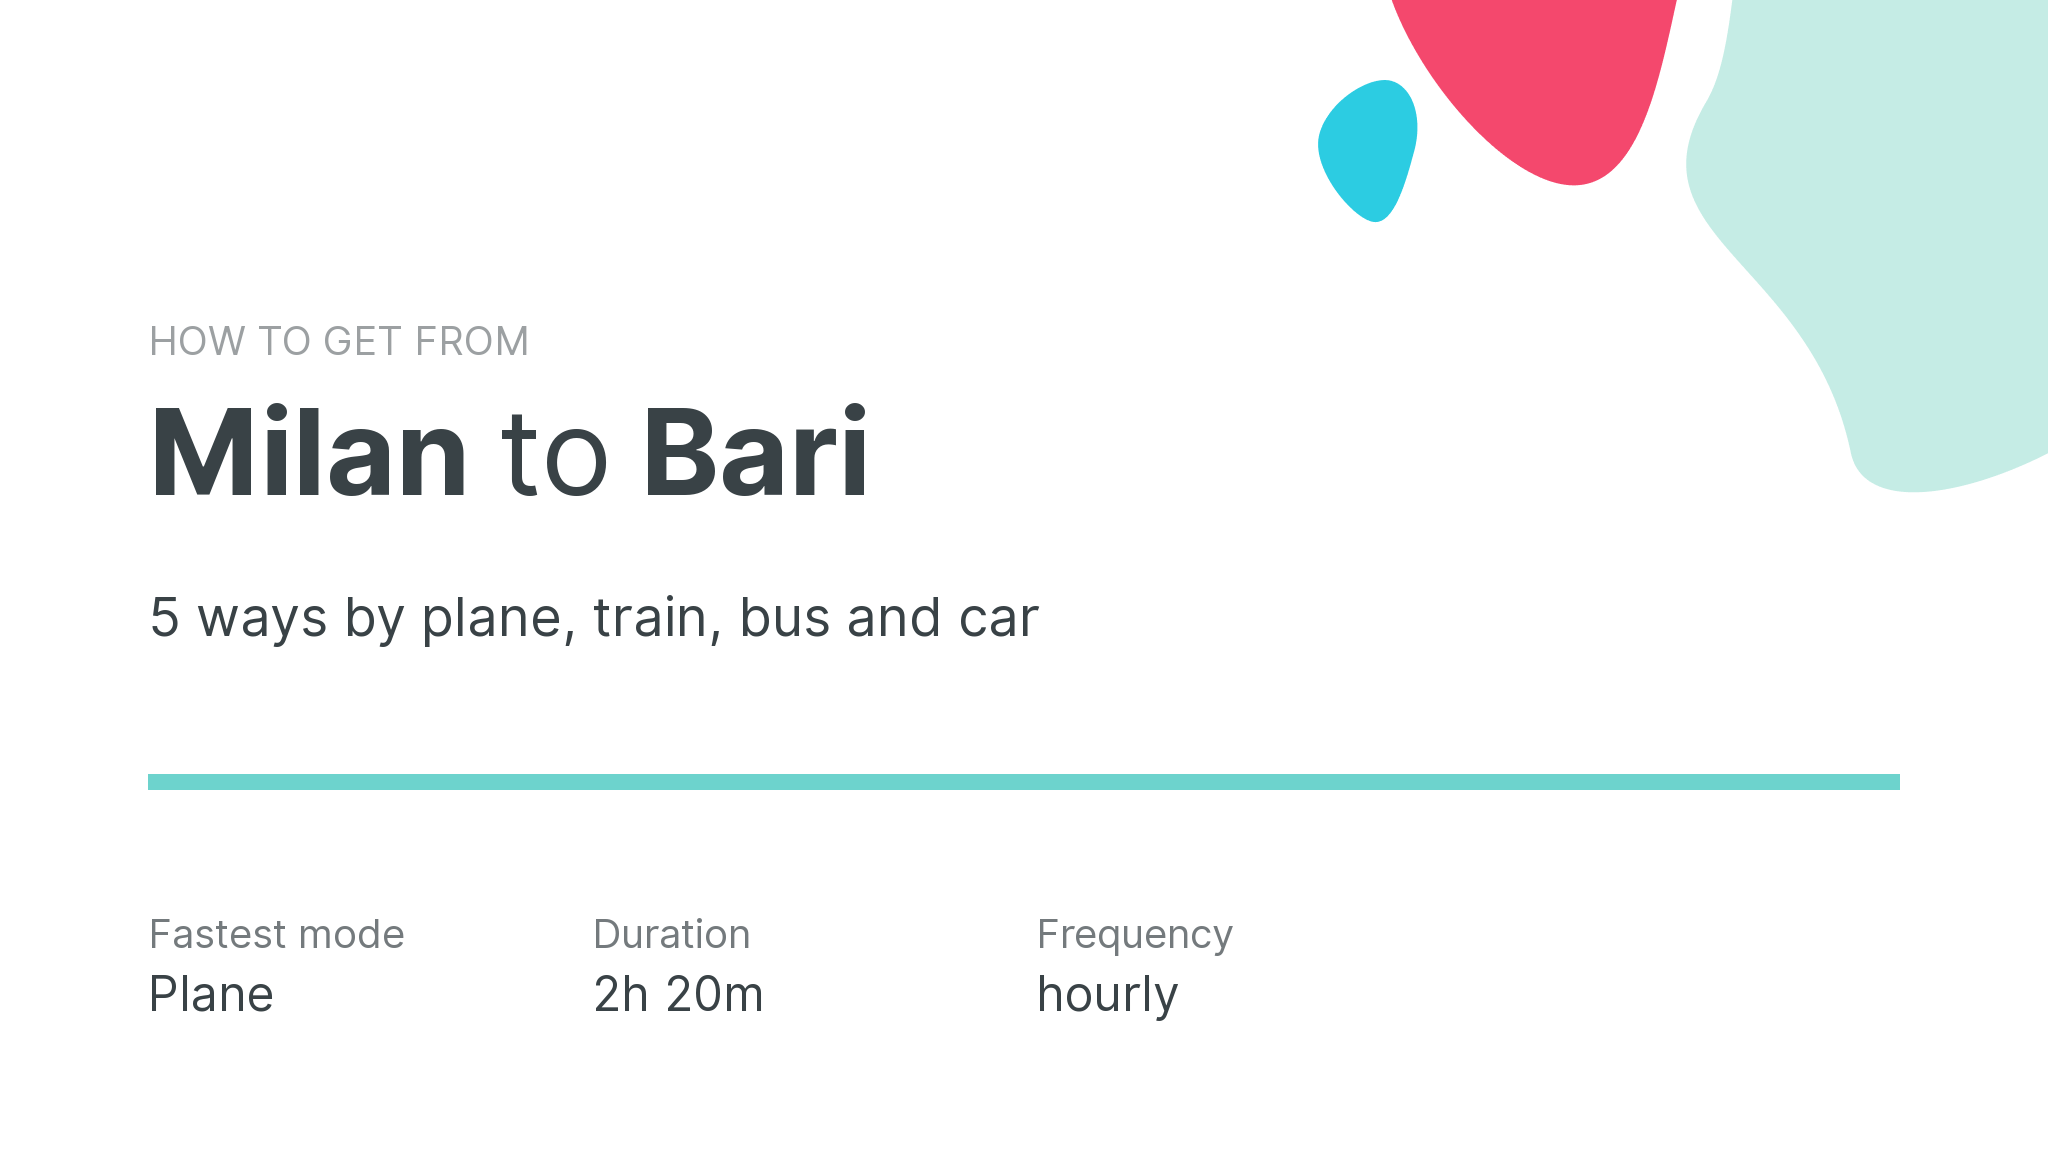 How do I get from Milan to Bari